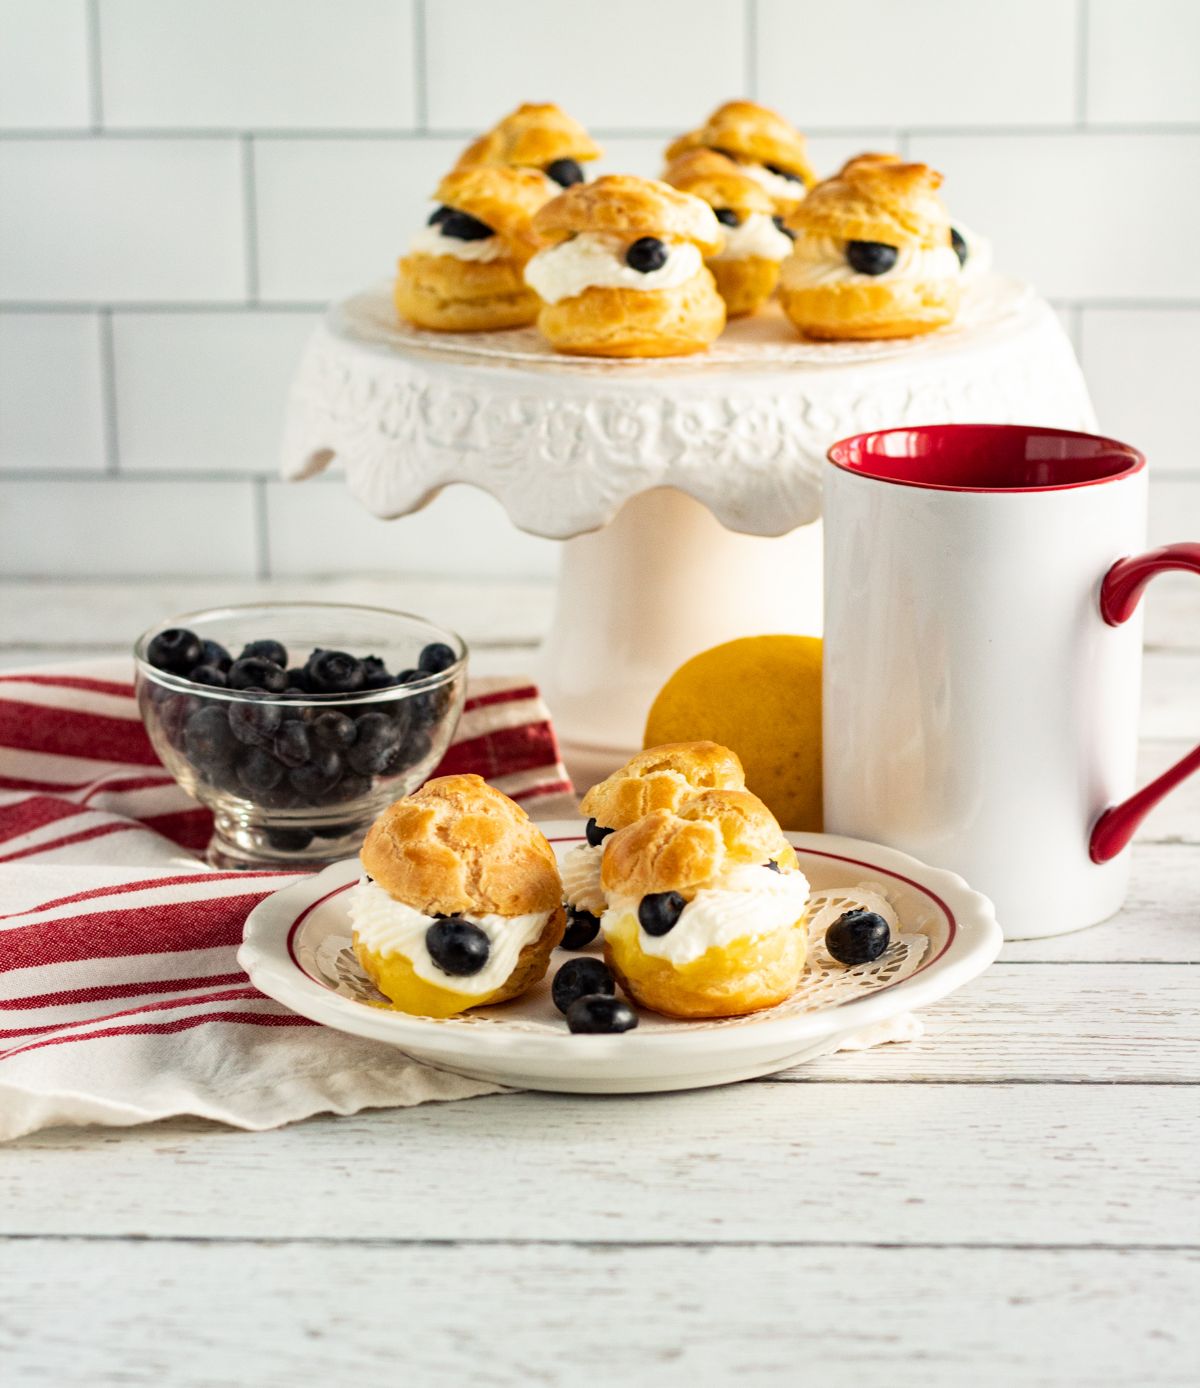 Lemon Cream Puffs With Fresh Blueberries on a plate and cake stand next to blueberries in a glass bowl, a lemon, a white and red mug and a white and red striped cloth